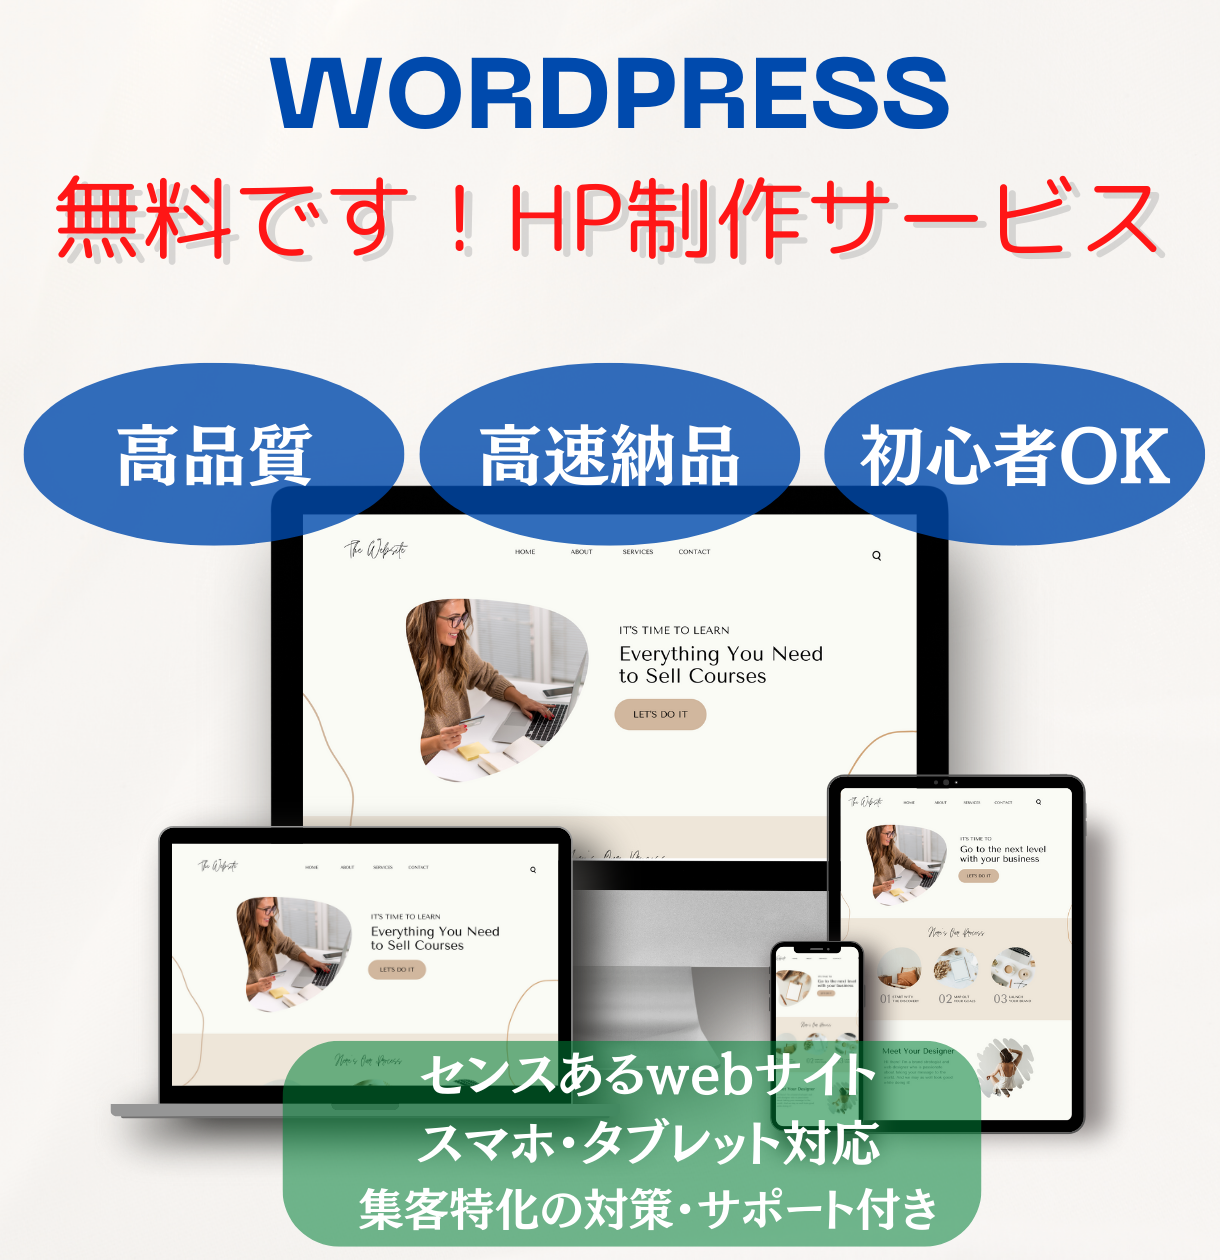 You are currently viewing 0円・無料でHPを制作可能！高品質なwebサイトサービス